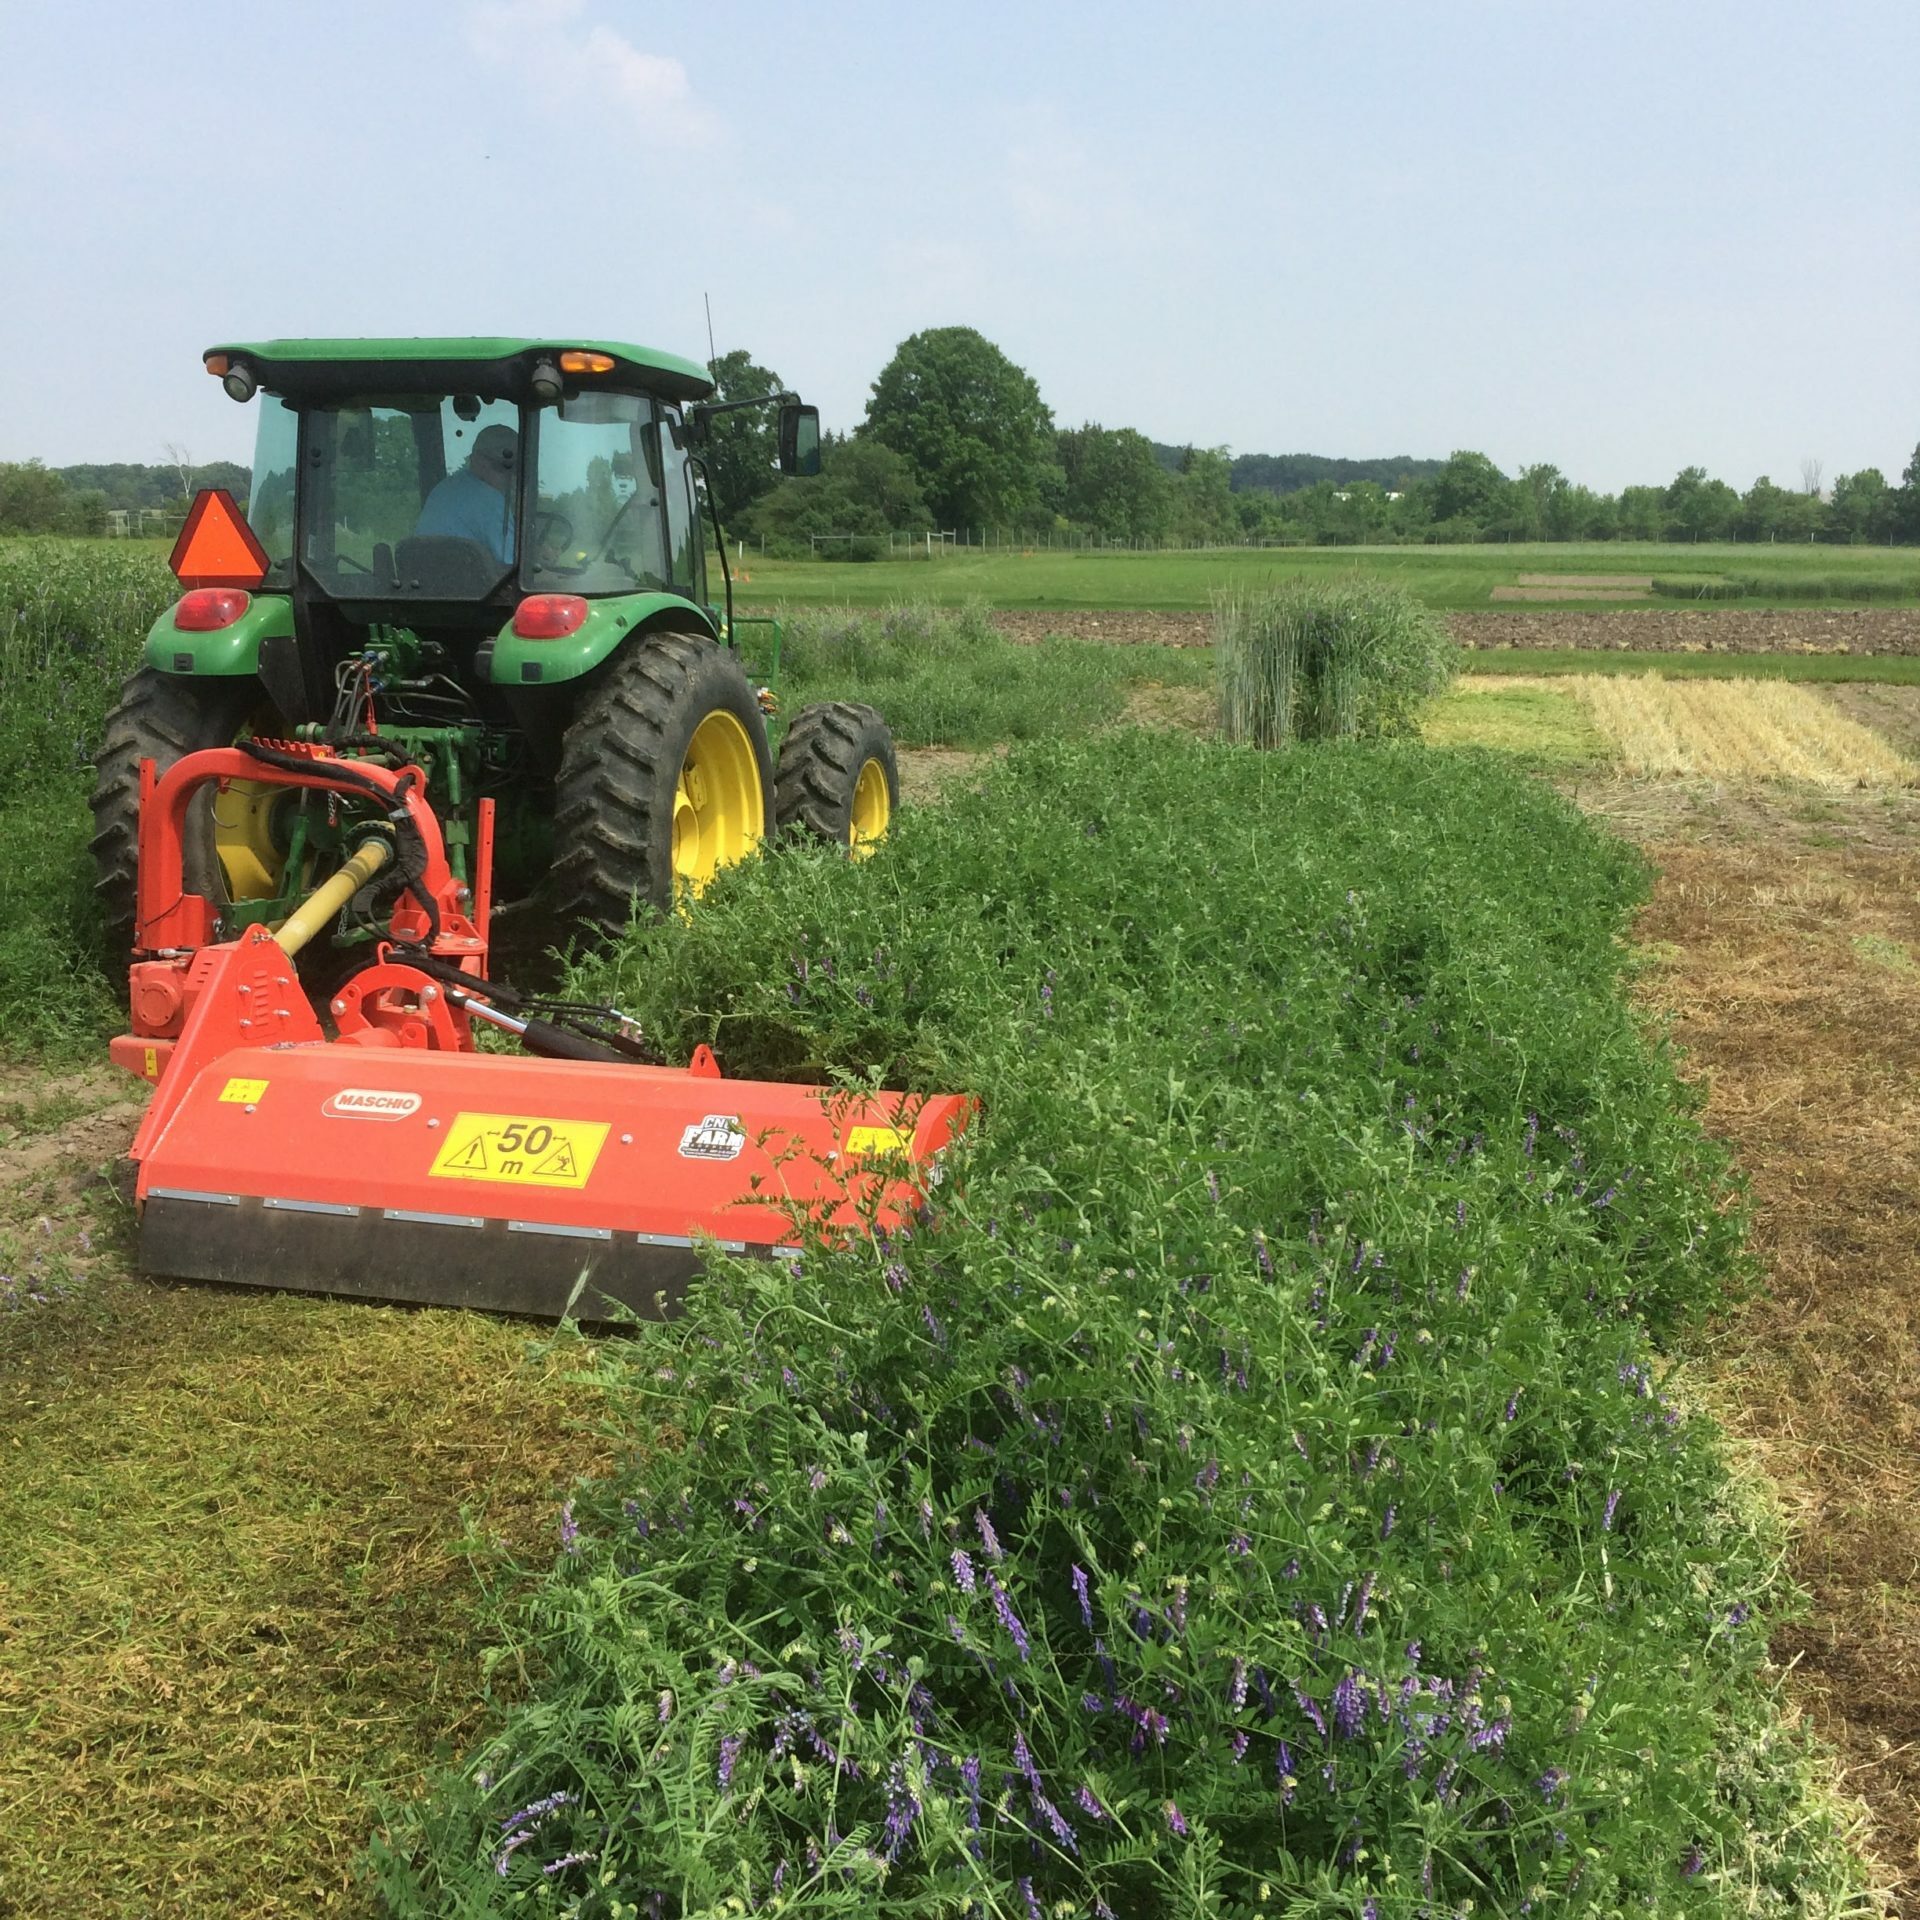 Hairy vetch can be terminated organically by mowing at flowering. When planted as a monoculture, vetch offers less biomass then rye-vetch mixtures. The benefits include greater N availability and less residue interference with strip tillage and cultivation operation if and when weeds emerge.